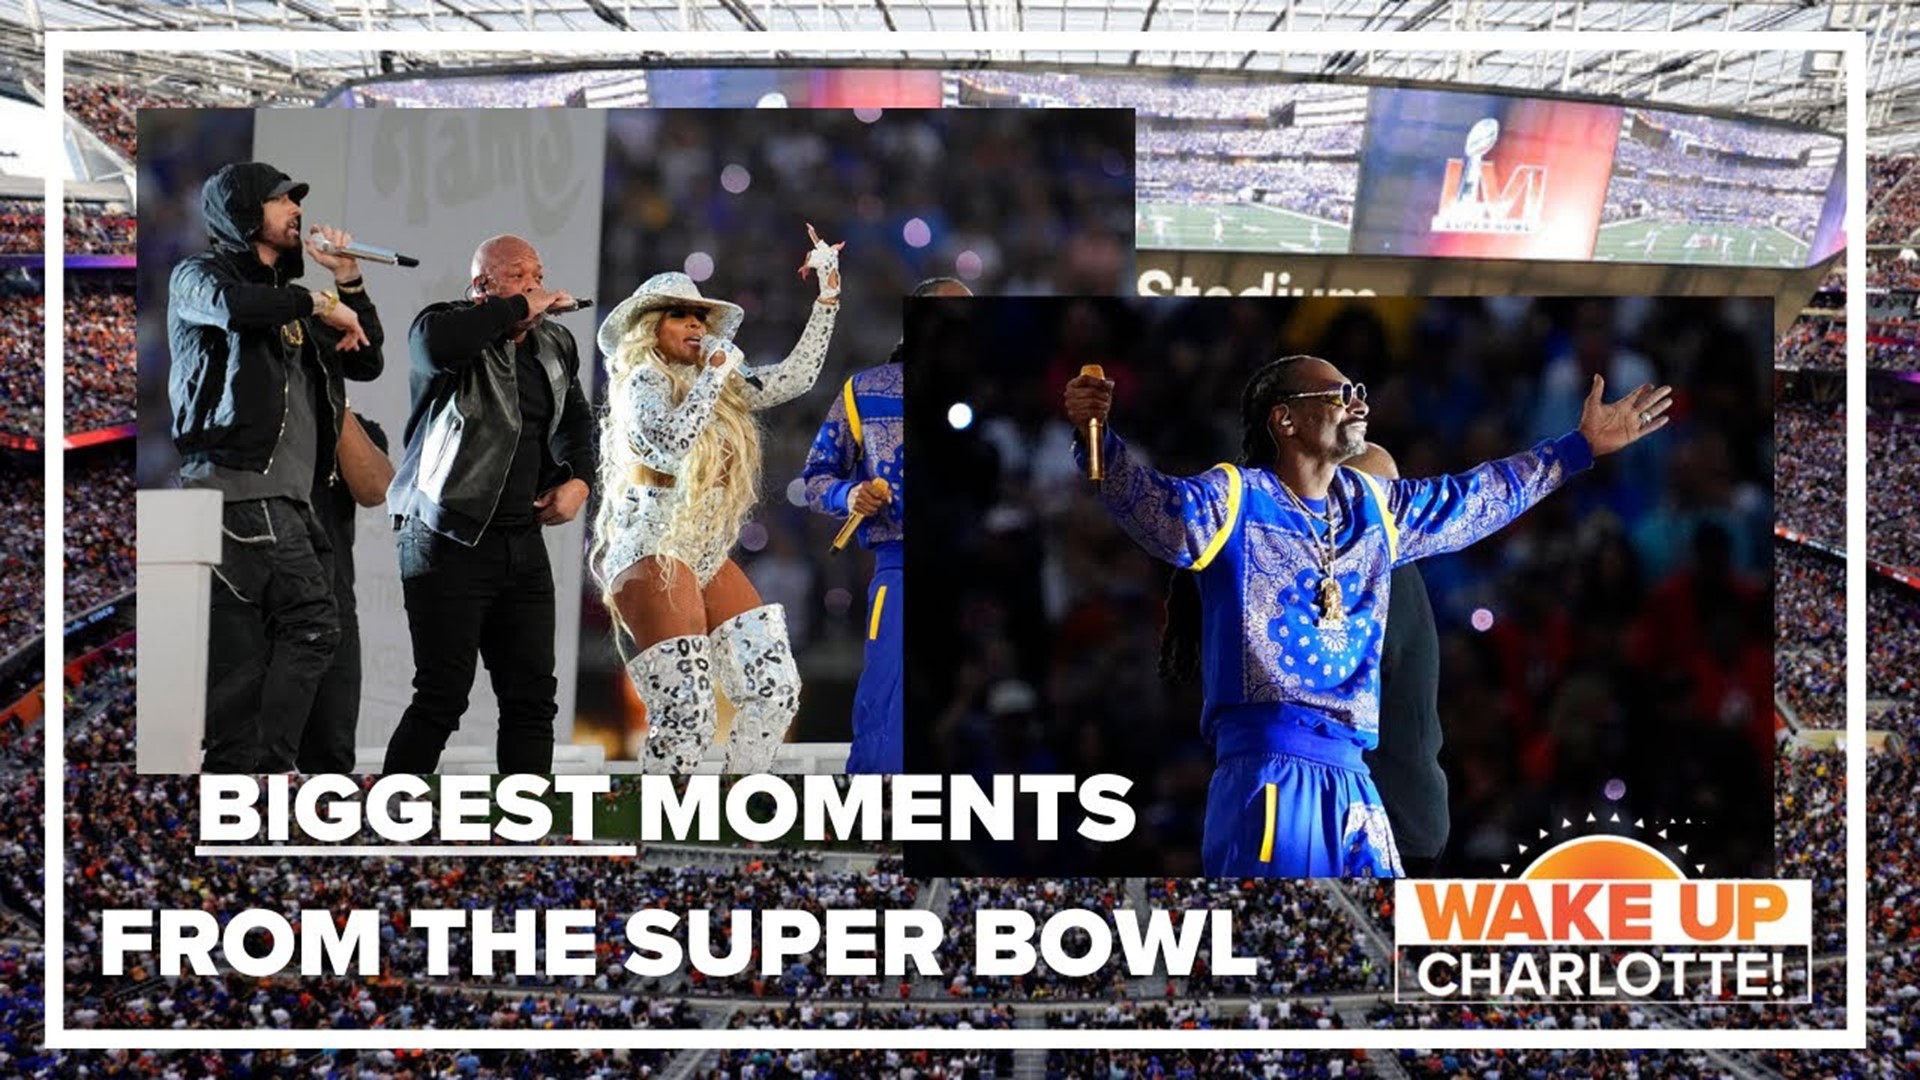 The Rams defeated the Bengals, halftime was a huge hit on social media and commercials were dominated by celebrities and crypto. What was your favorite moment?